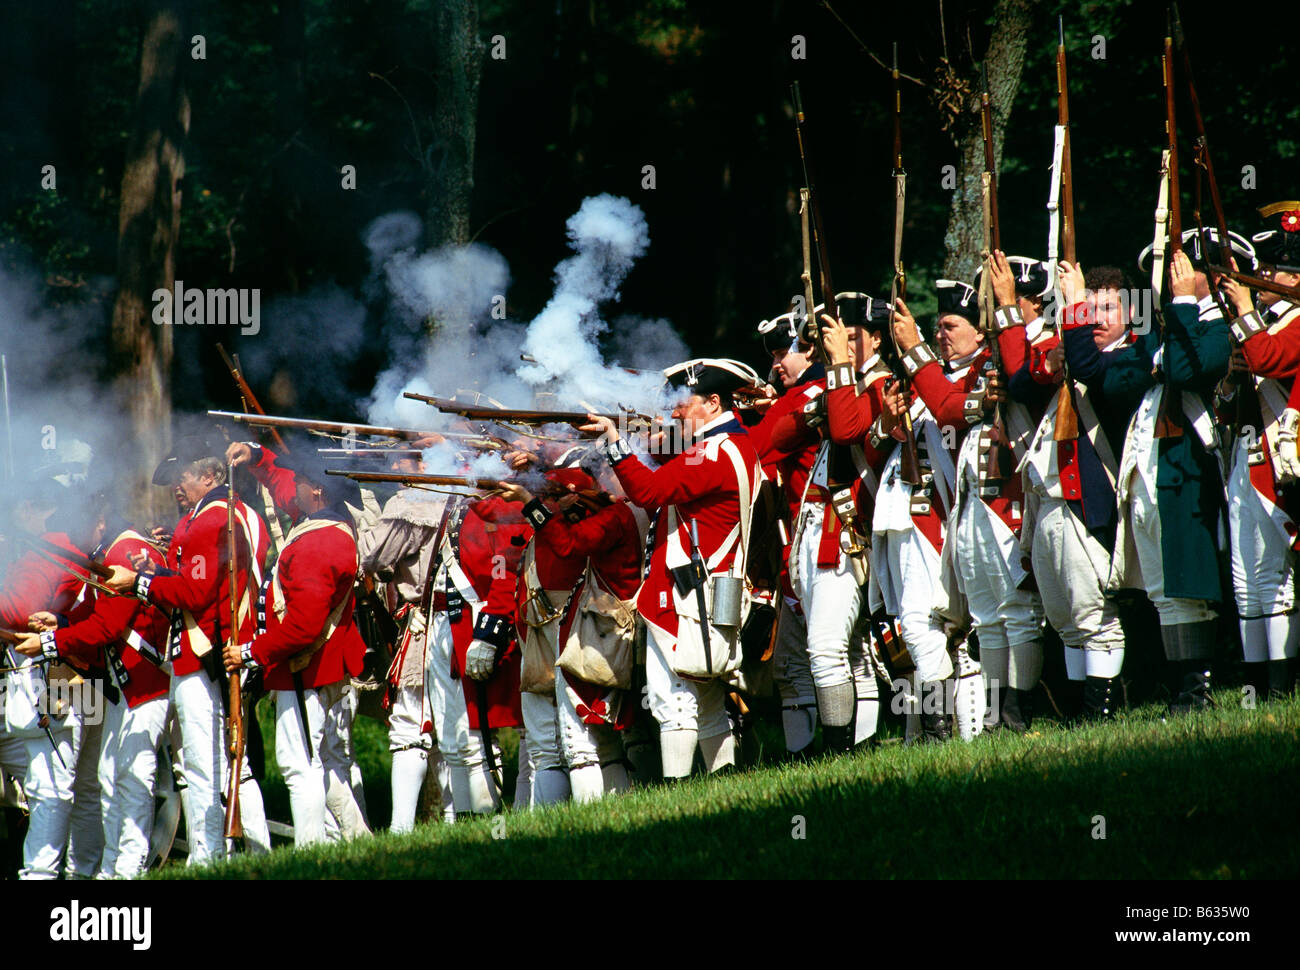 Red coat soldiers at a Revolutionary War encampment reenactment Brandywine Battlefield Park Chadds Ford Pennsylvania USA Stock Photo